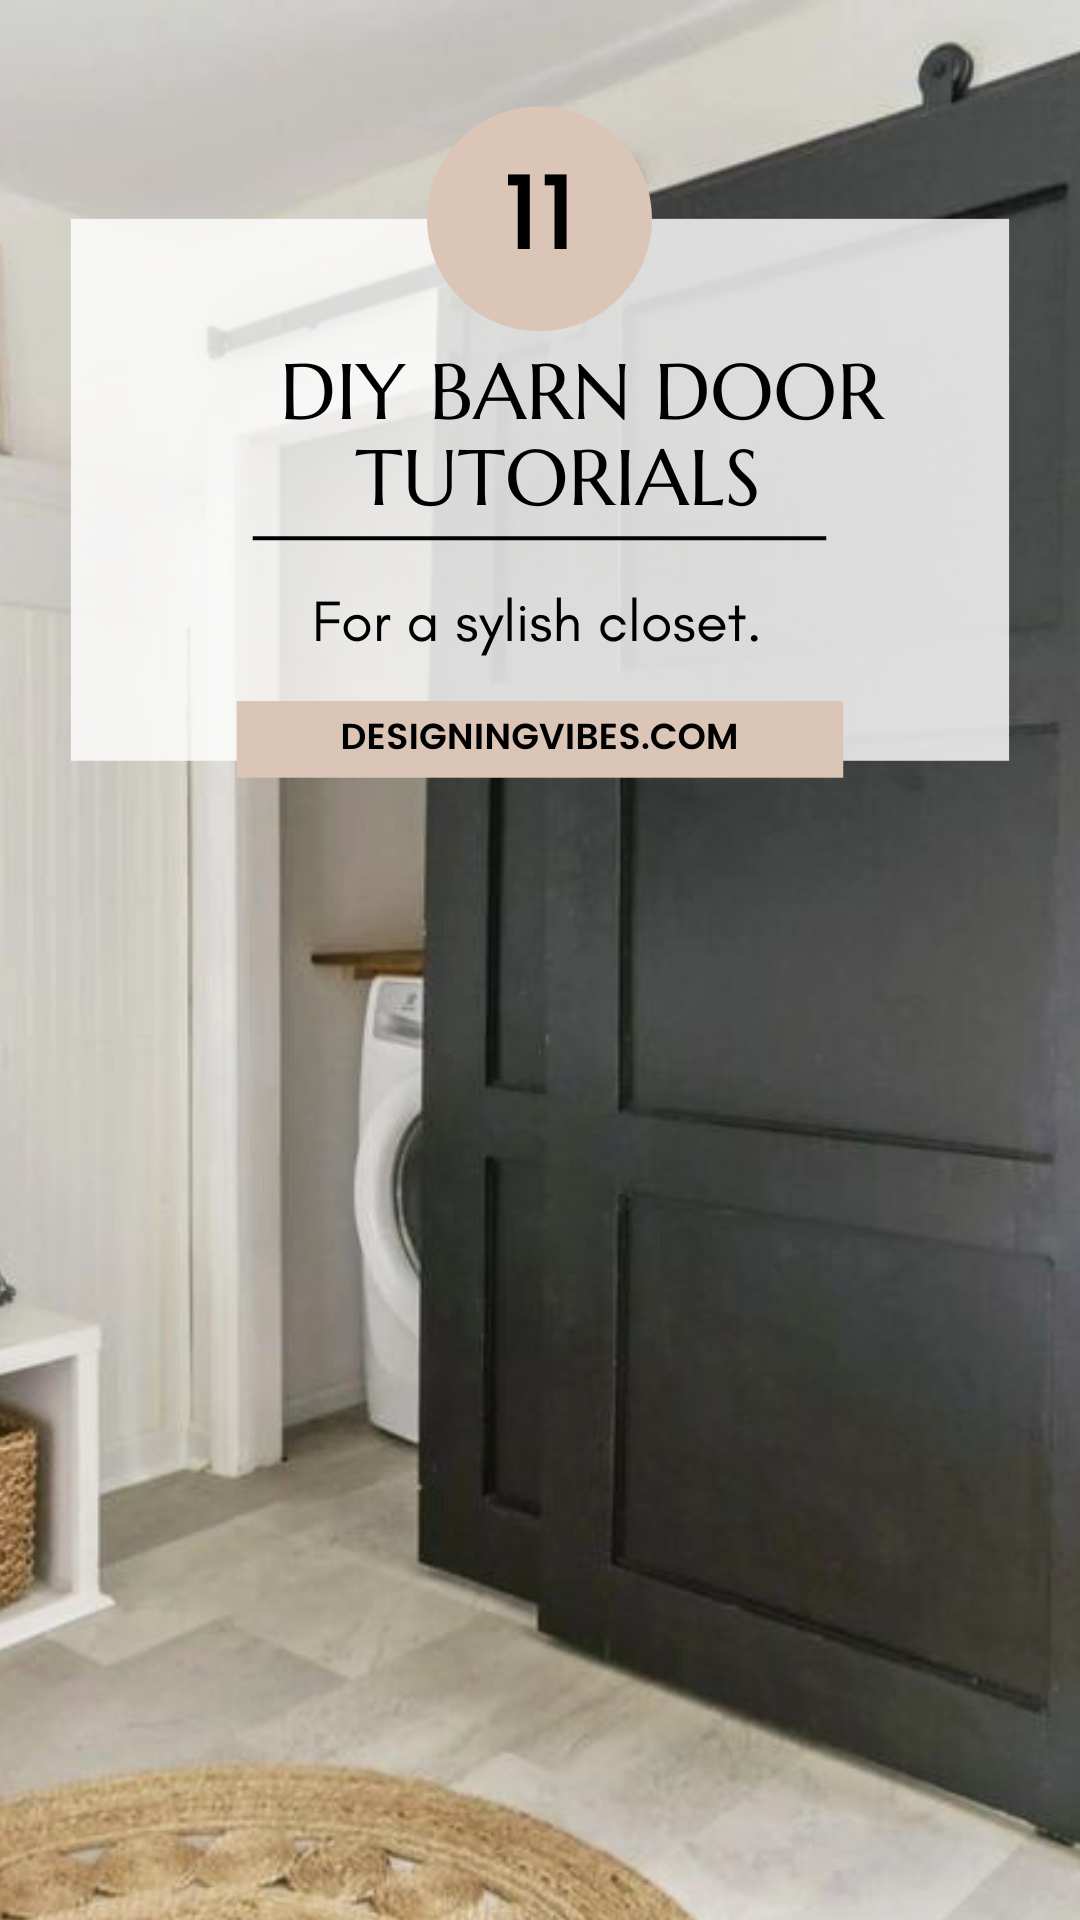 How to Build Cabinet Doors with Glass Panels - Houseful of Handmade